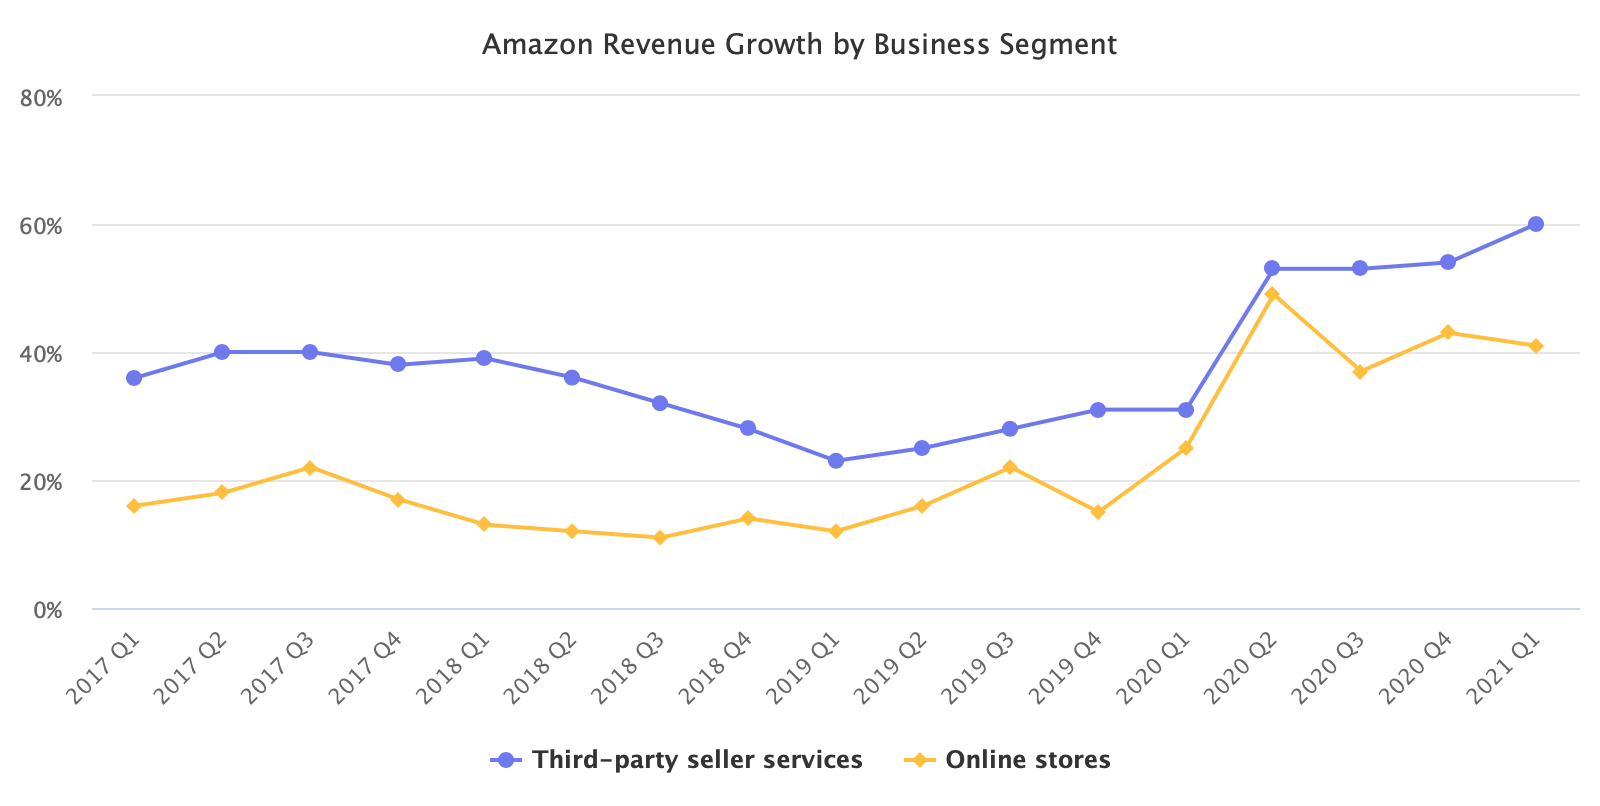 Amazon revenue from Online Stores vs Third-party seller services